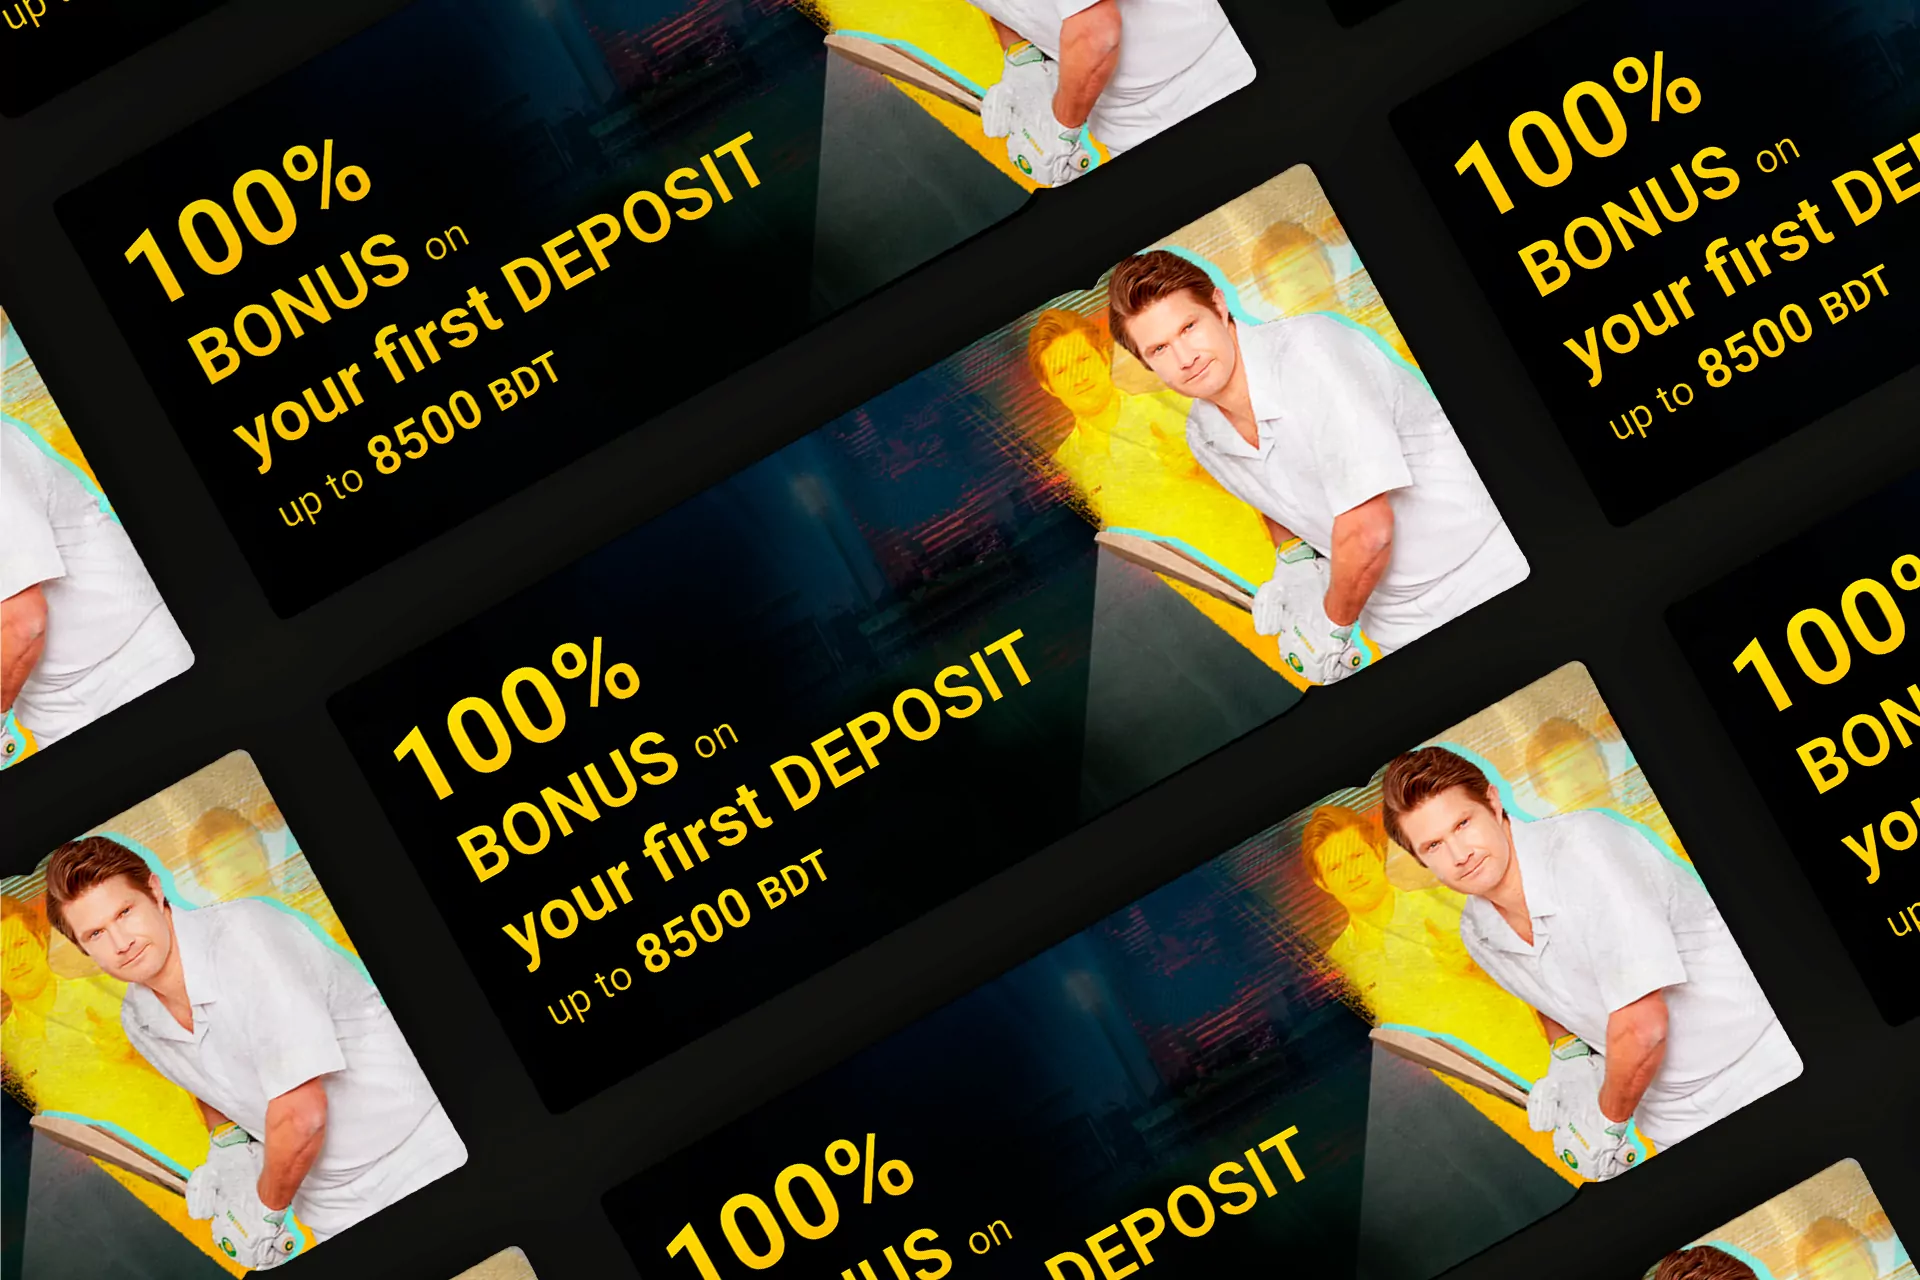 Get the +100% Melbet bonus of up to 10,000 BDT on your first deposit.